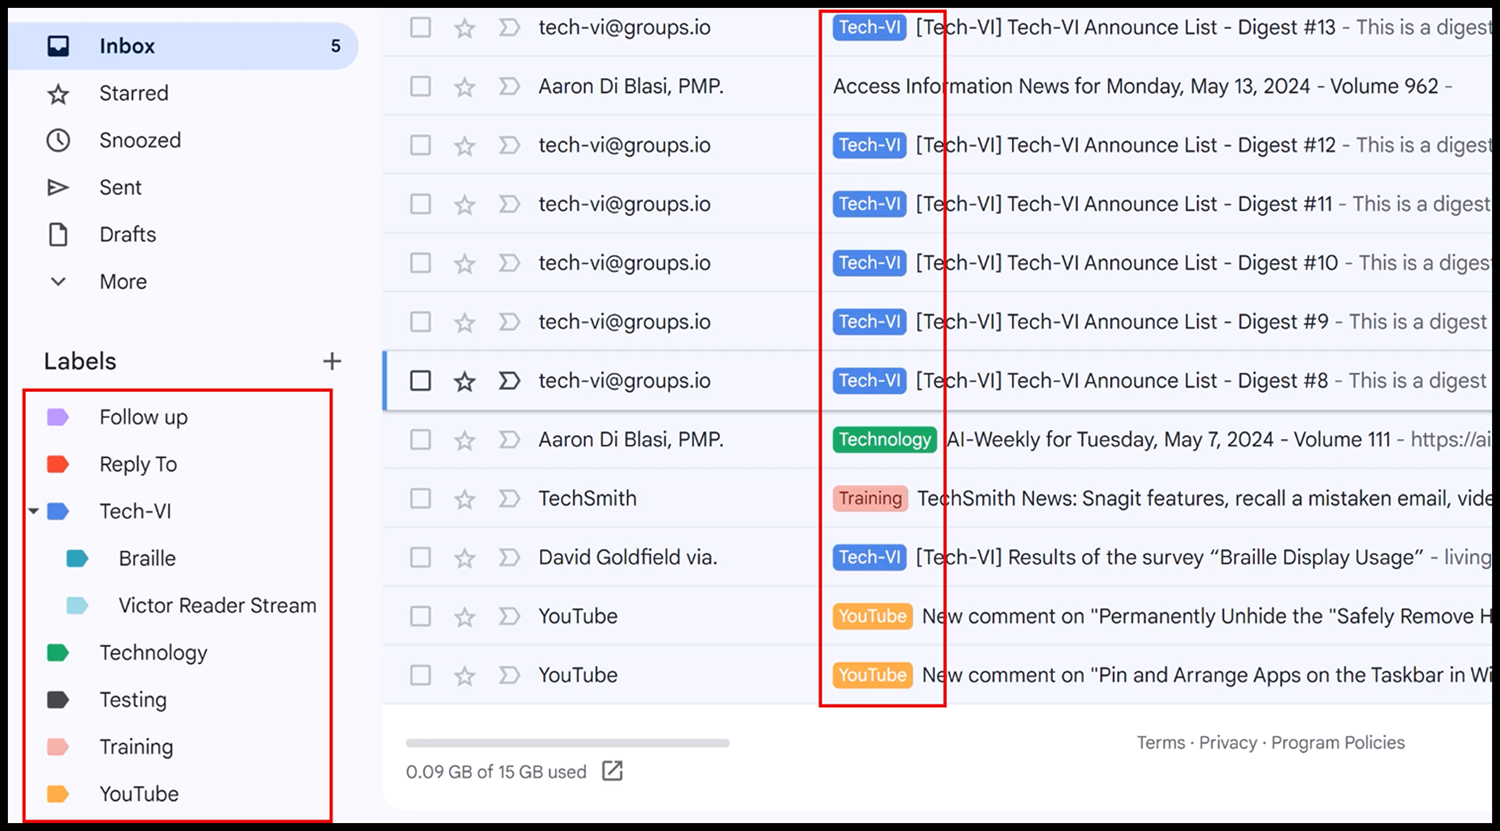 Labels in Gmail showing vibrant colors.